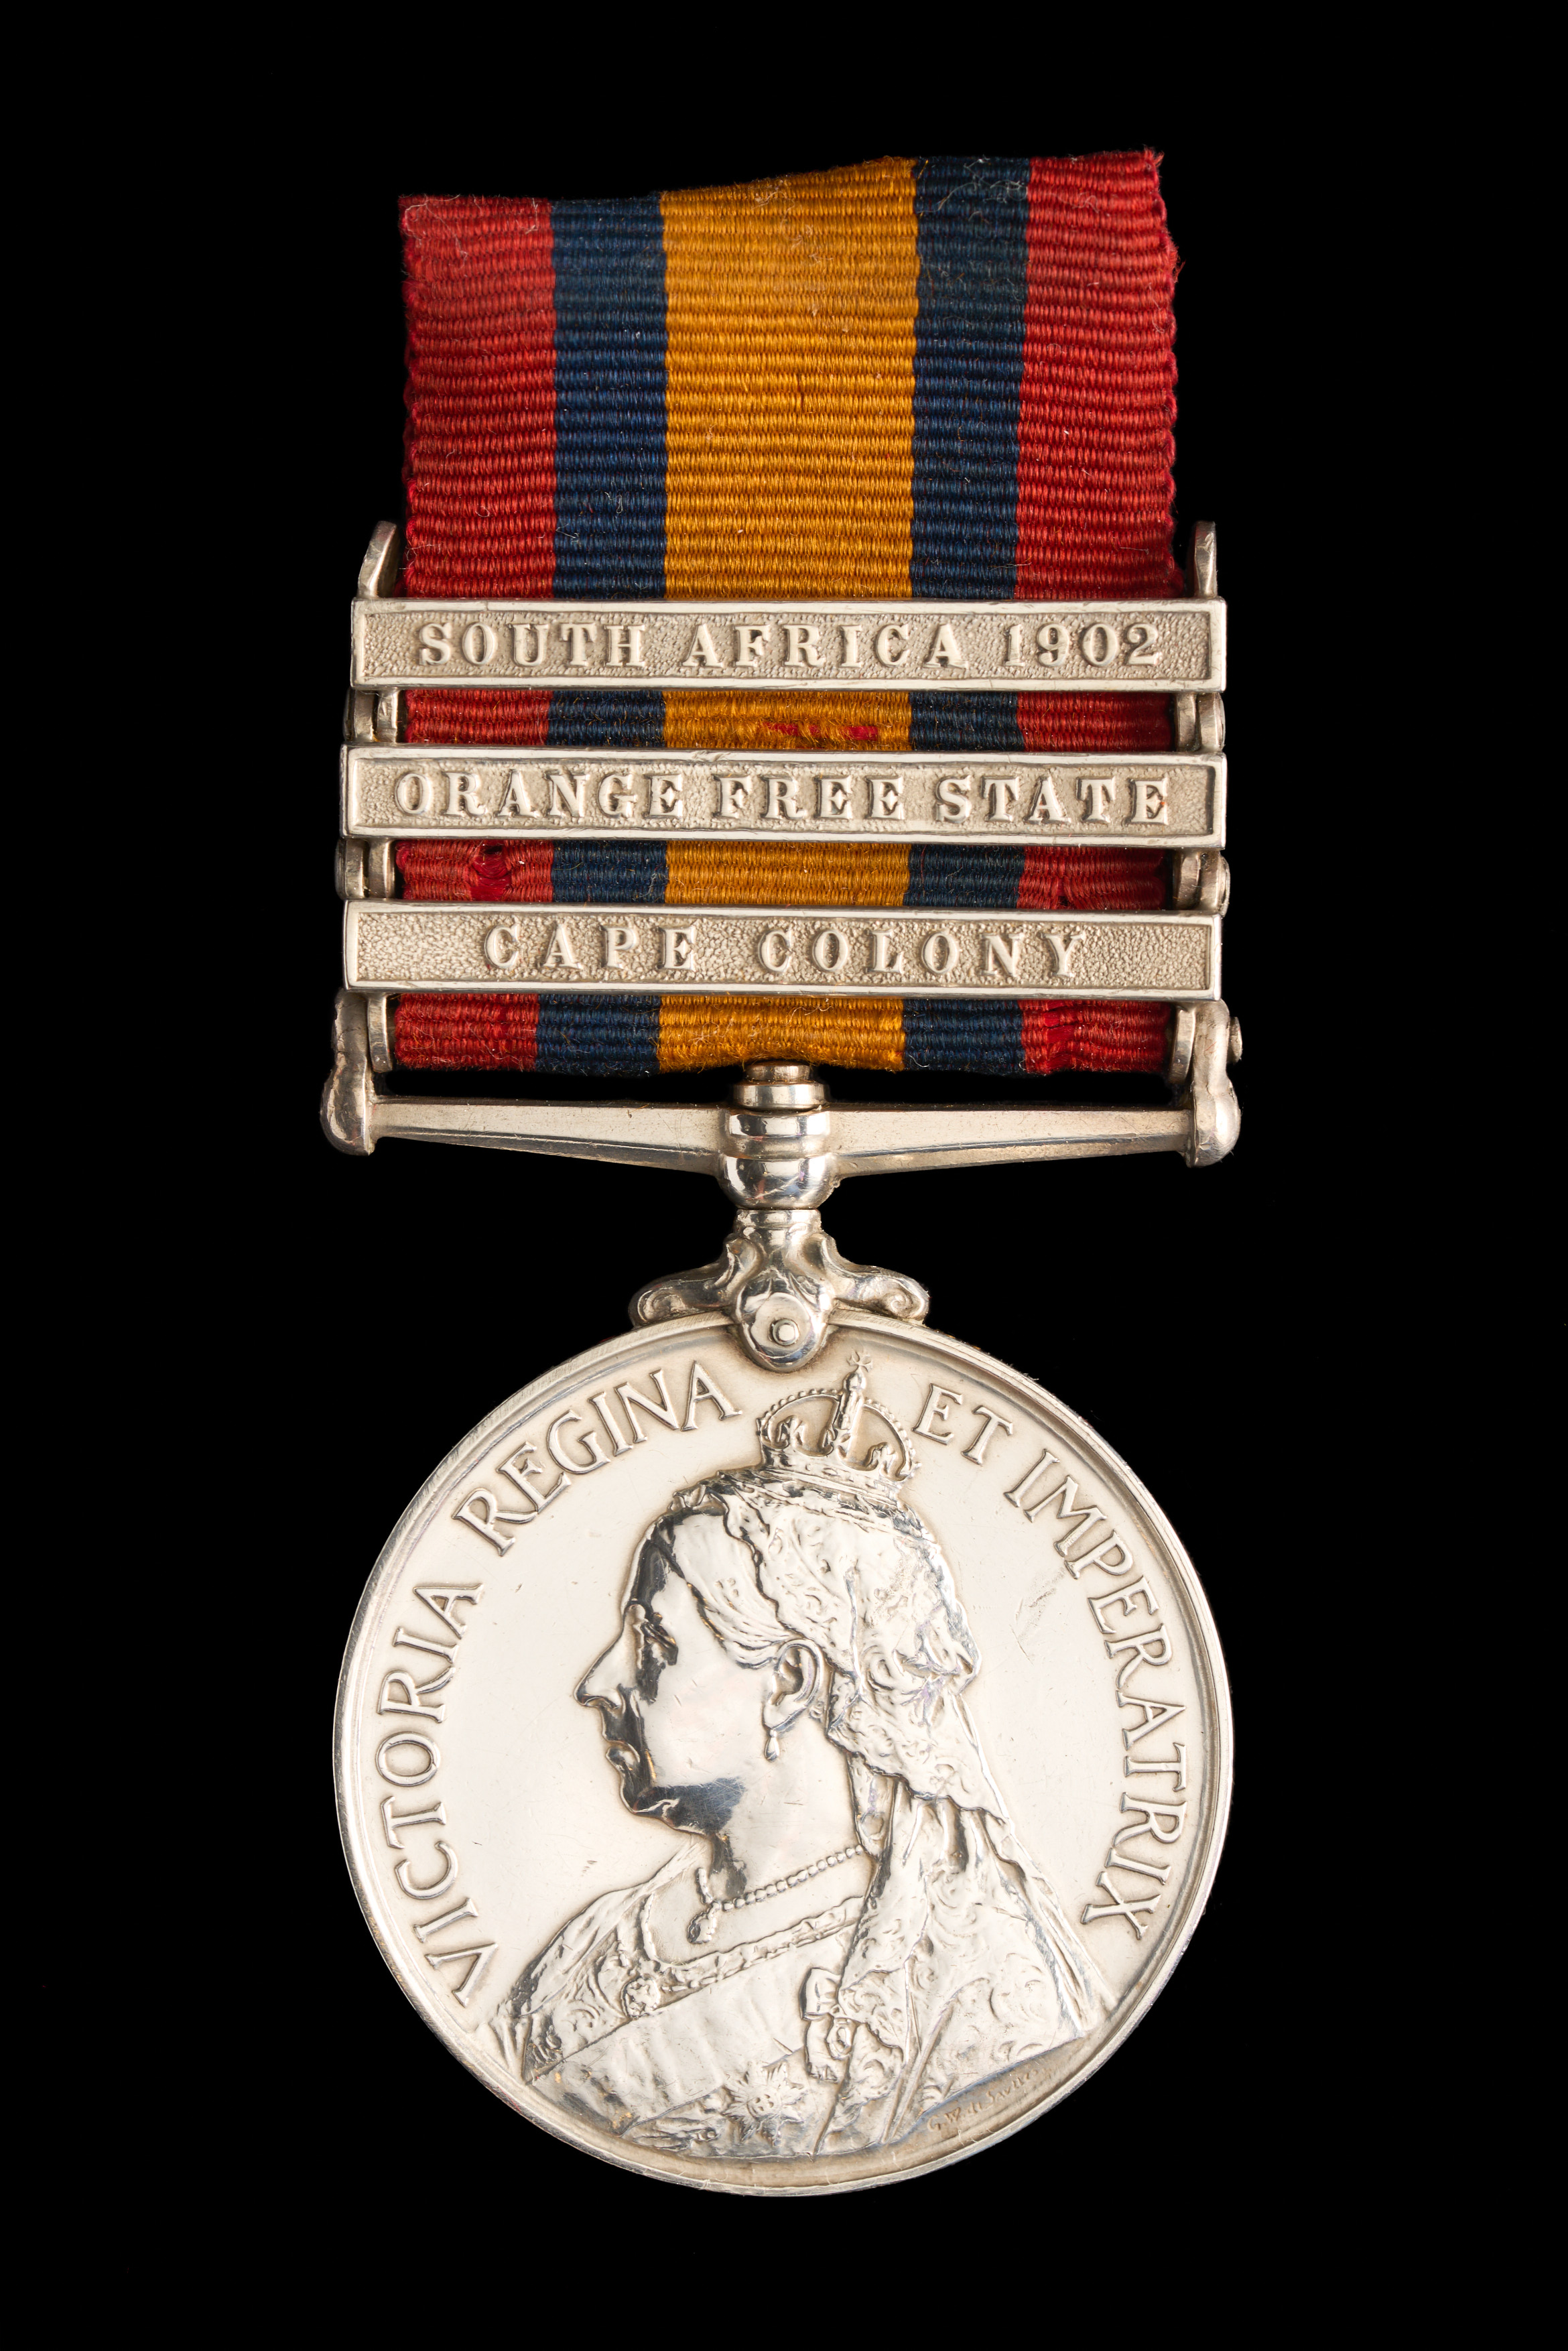 James Newton : Queen’s South Africa Medal with ‘Cape Colony’, ‘Orange Free State’ and ‘South Africa 1902’ clasps